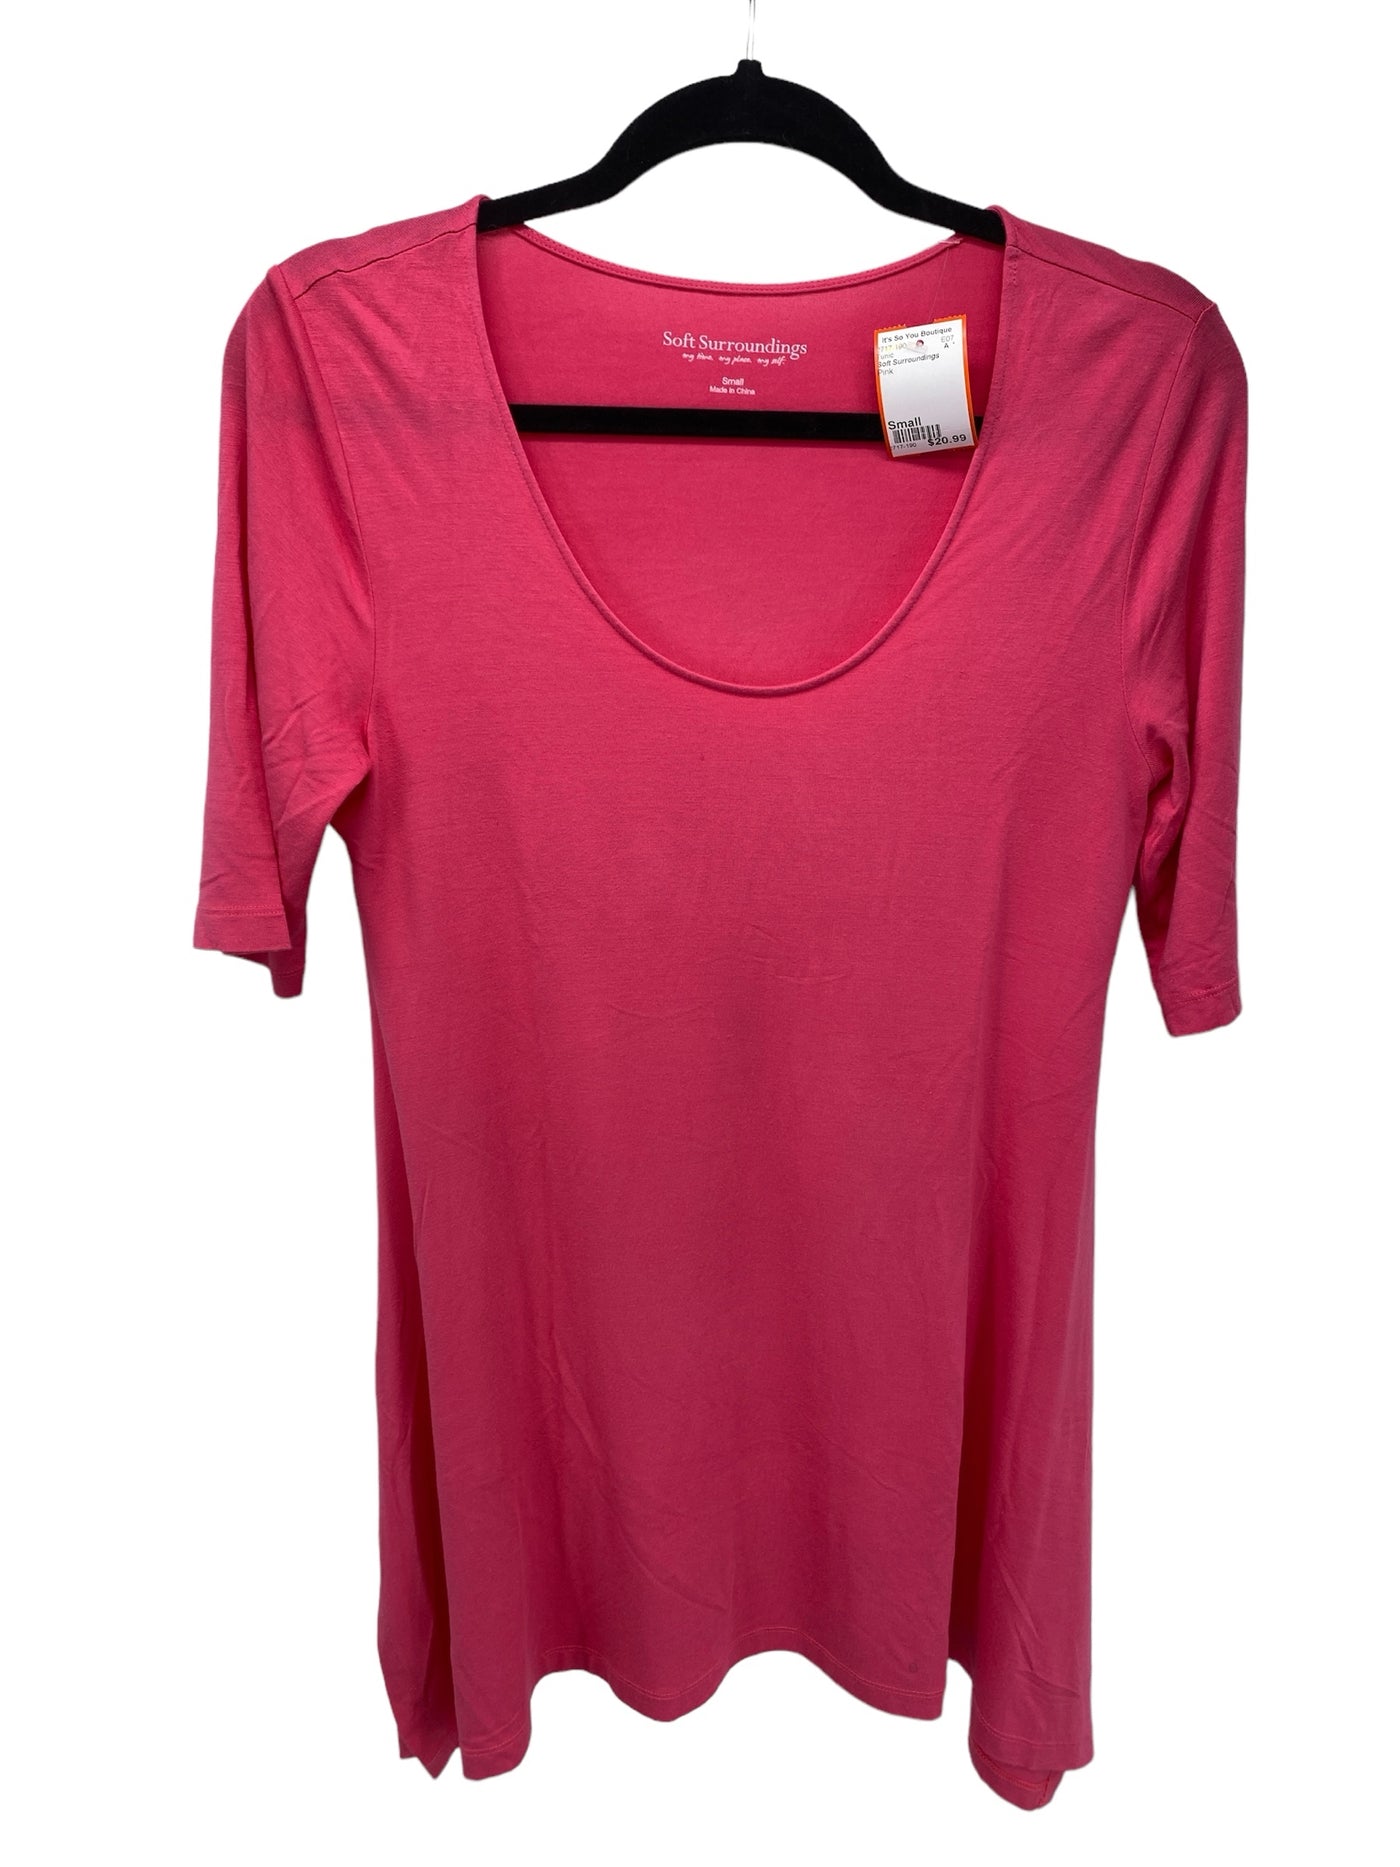 Soft Surroundings Misses Size Small Pink Tunic